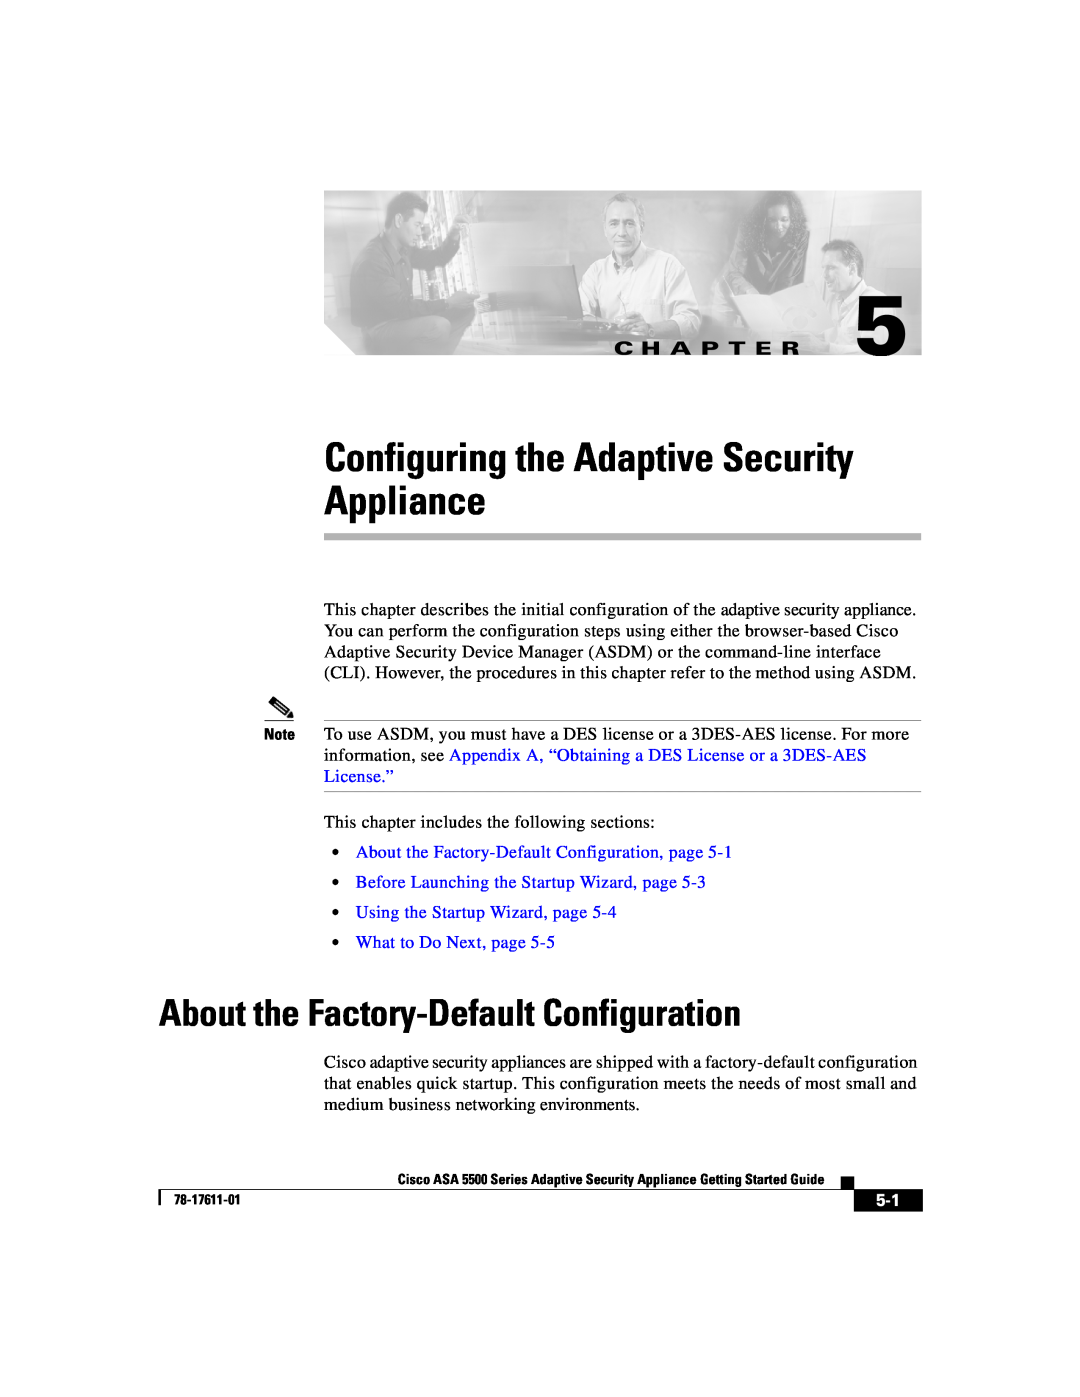 Cisco Systems ASA 5500 Configuring the Adaptive Security Appliance, About the Factory-DefaultConfiguration, C H A P T E R 